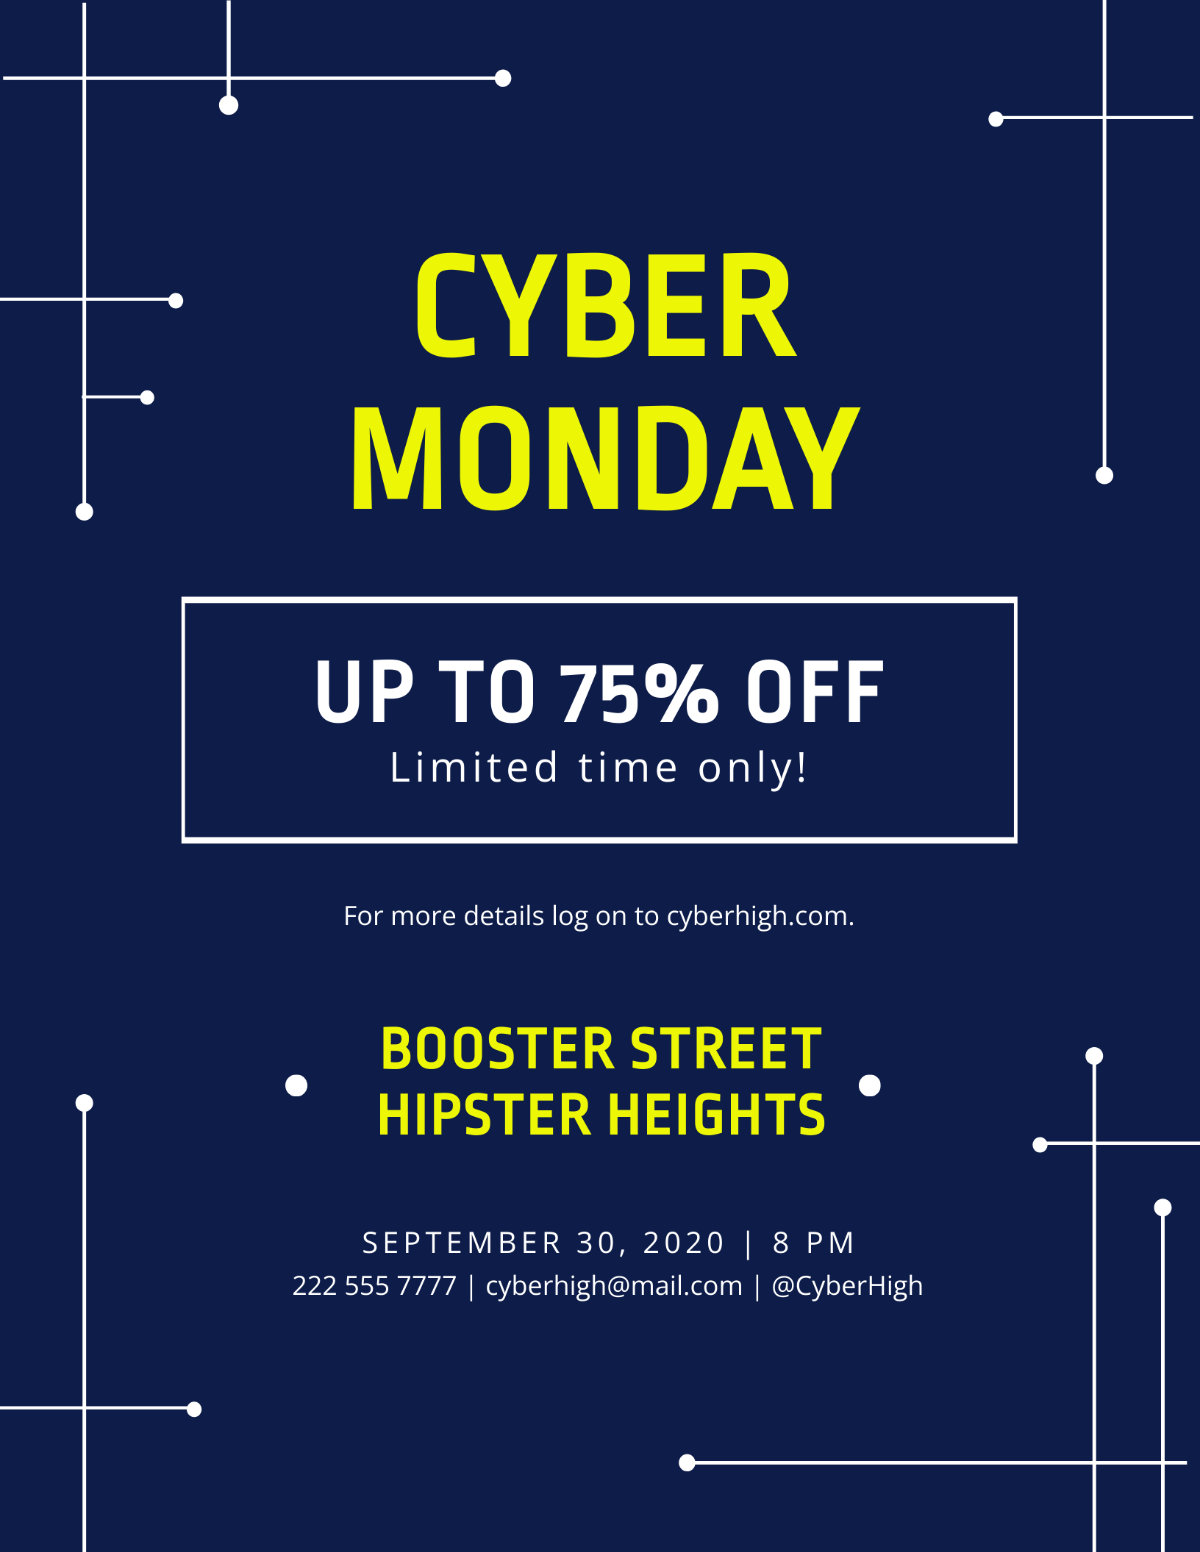 Cyber Monday Discount Flyer